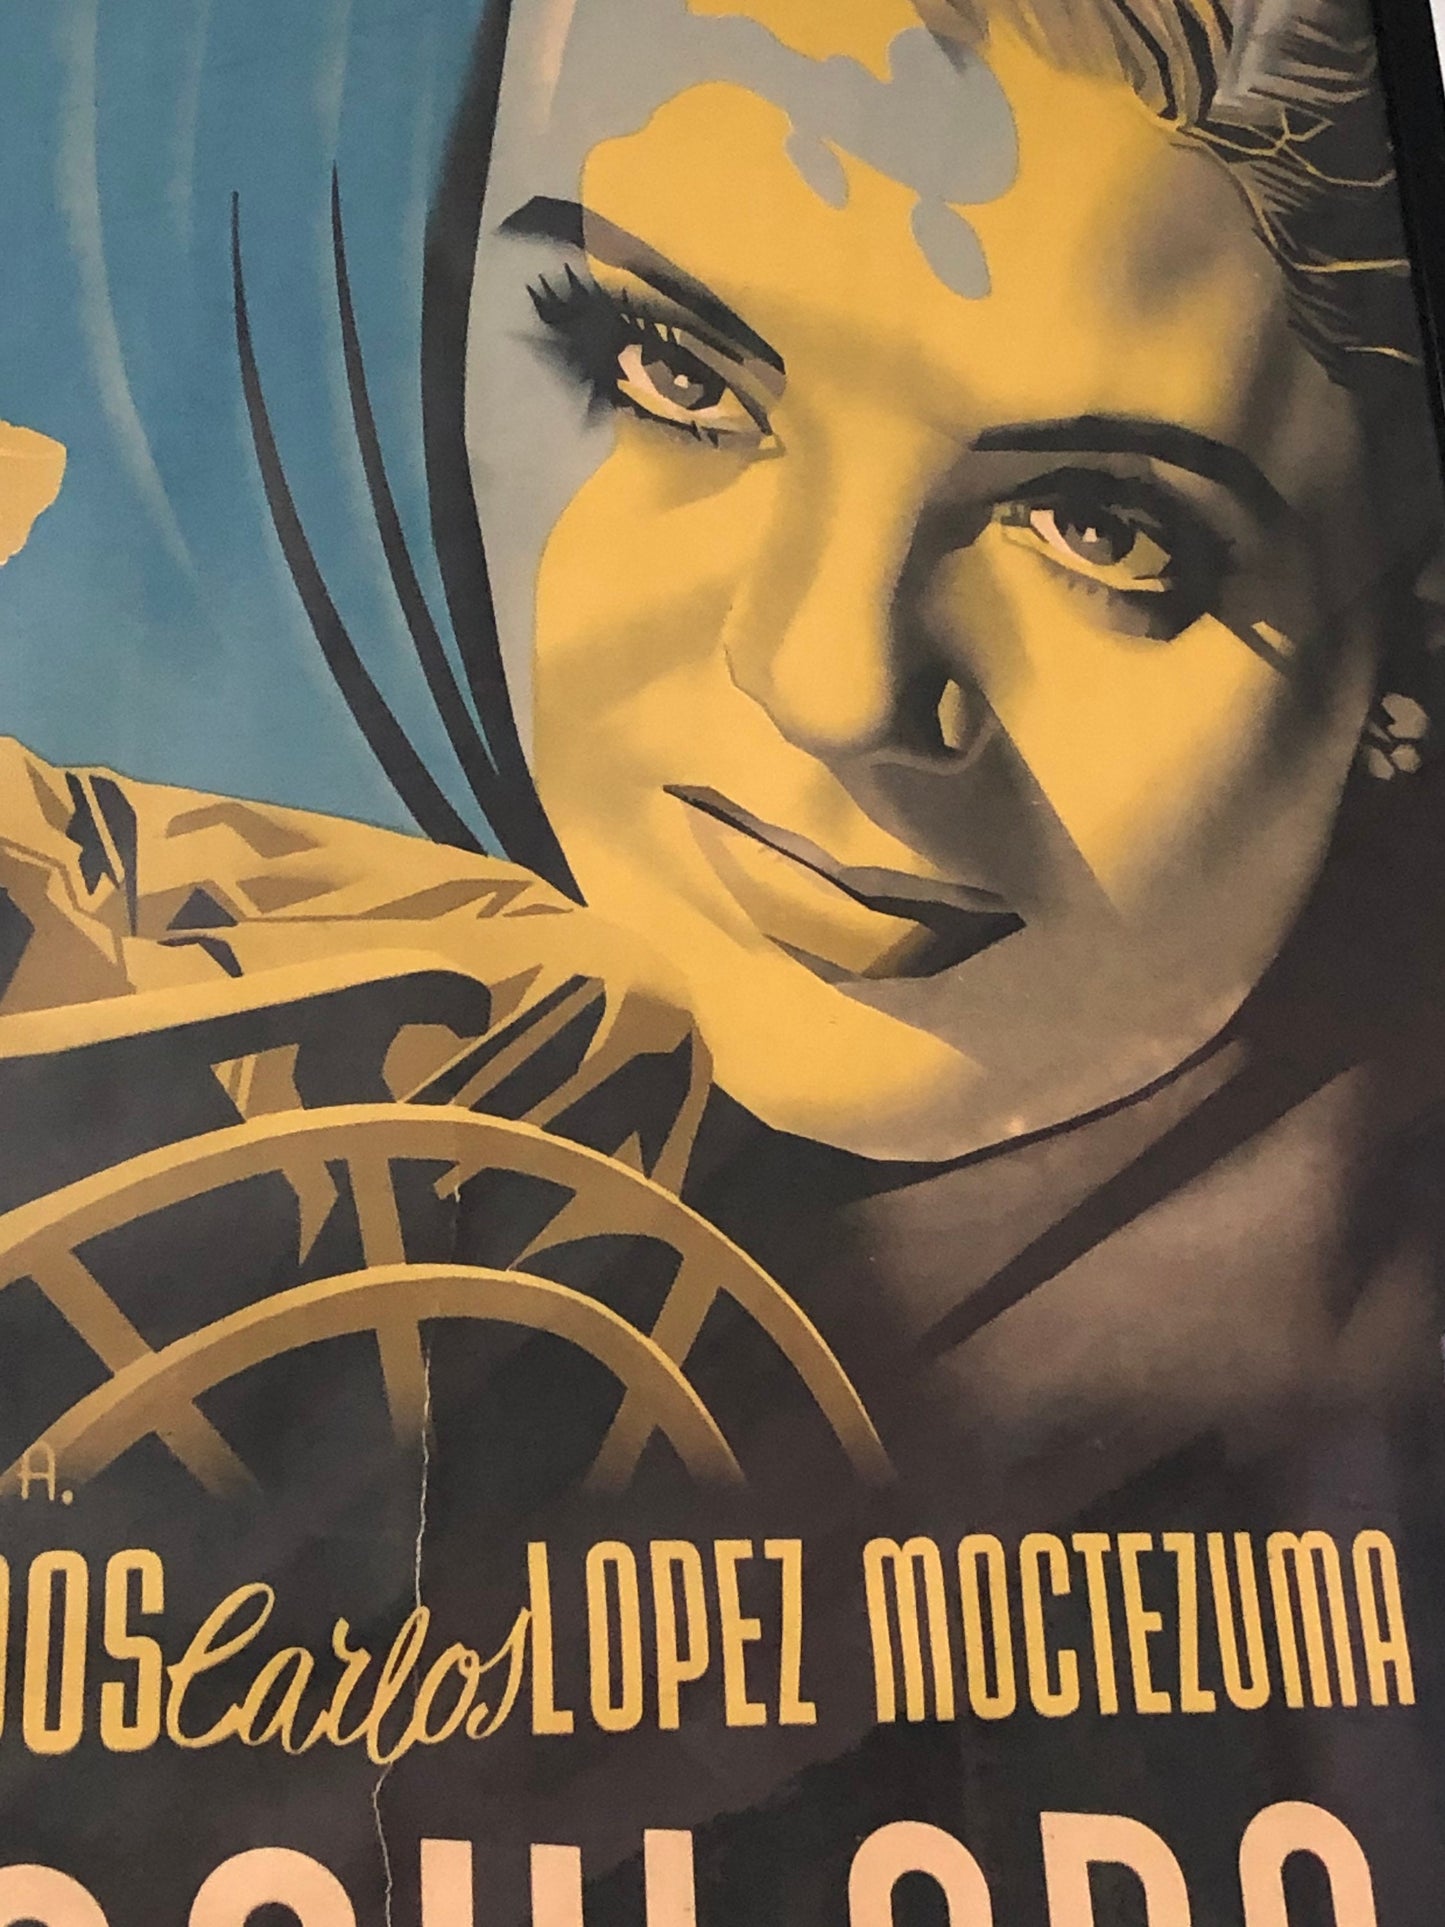 Vintage Mexican Movie Poster “Immaculada” Golden Age of Mexican Cinema